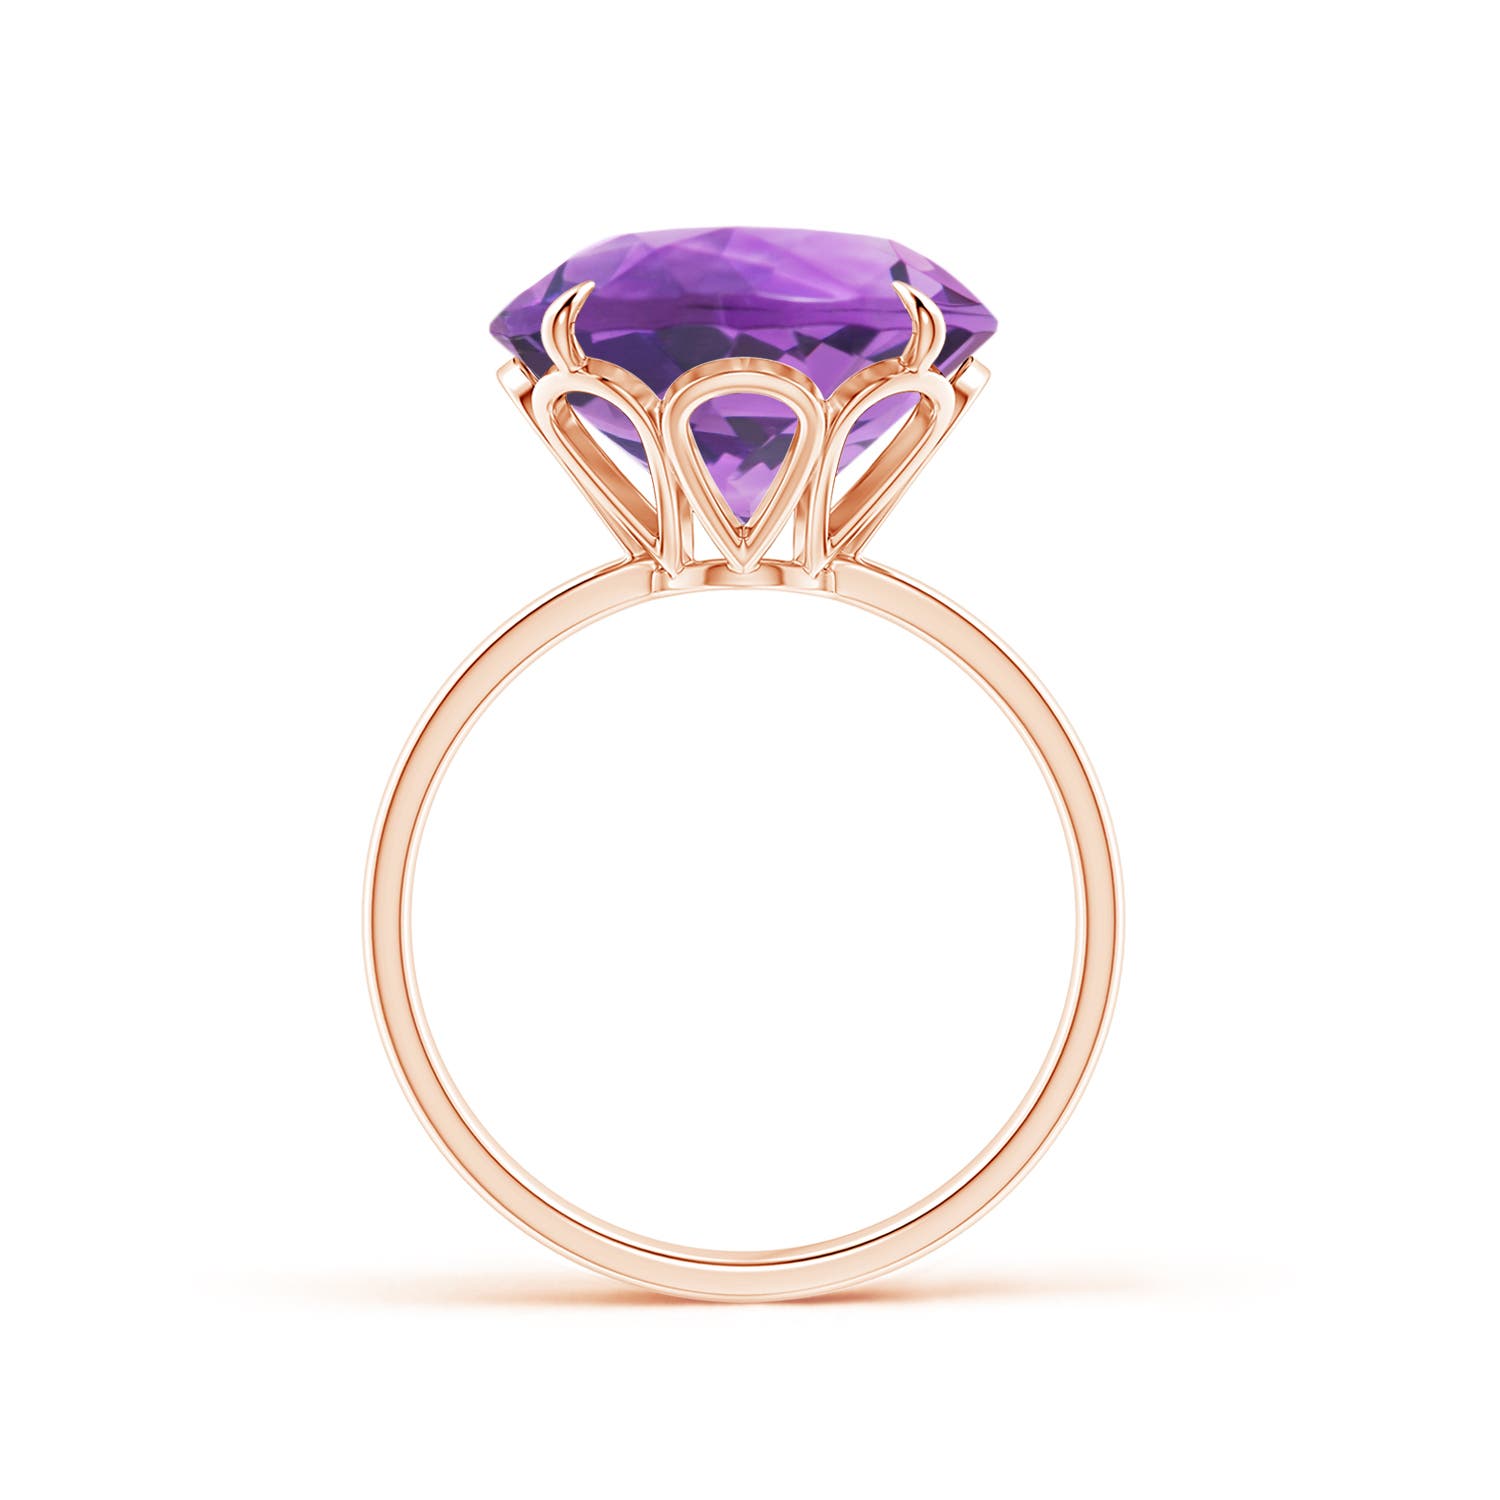 AA - Amethyst / 7.2 CT / 14 KT Rose Gold